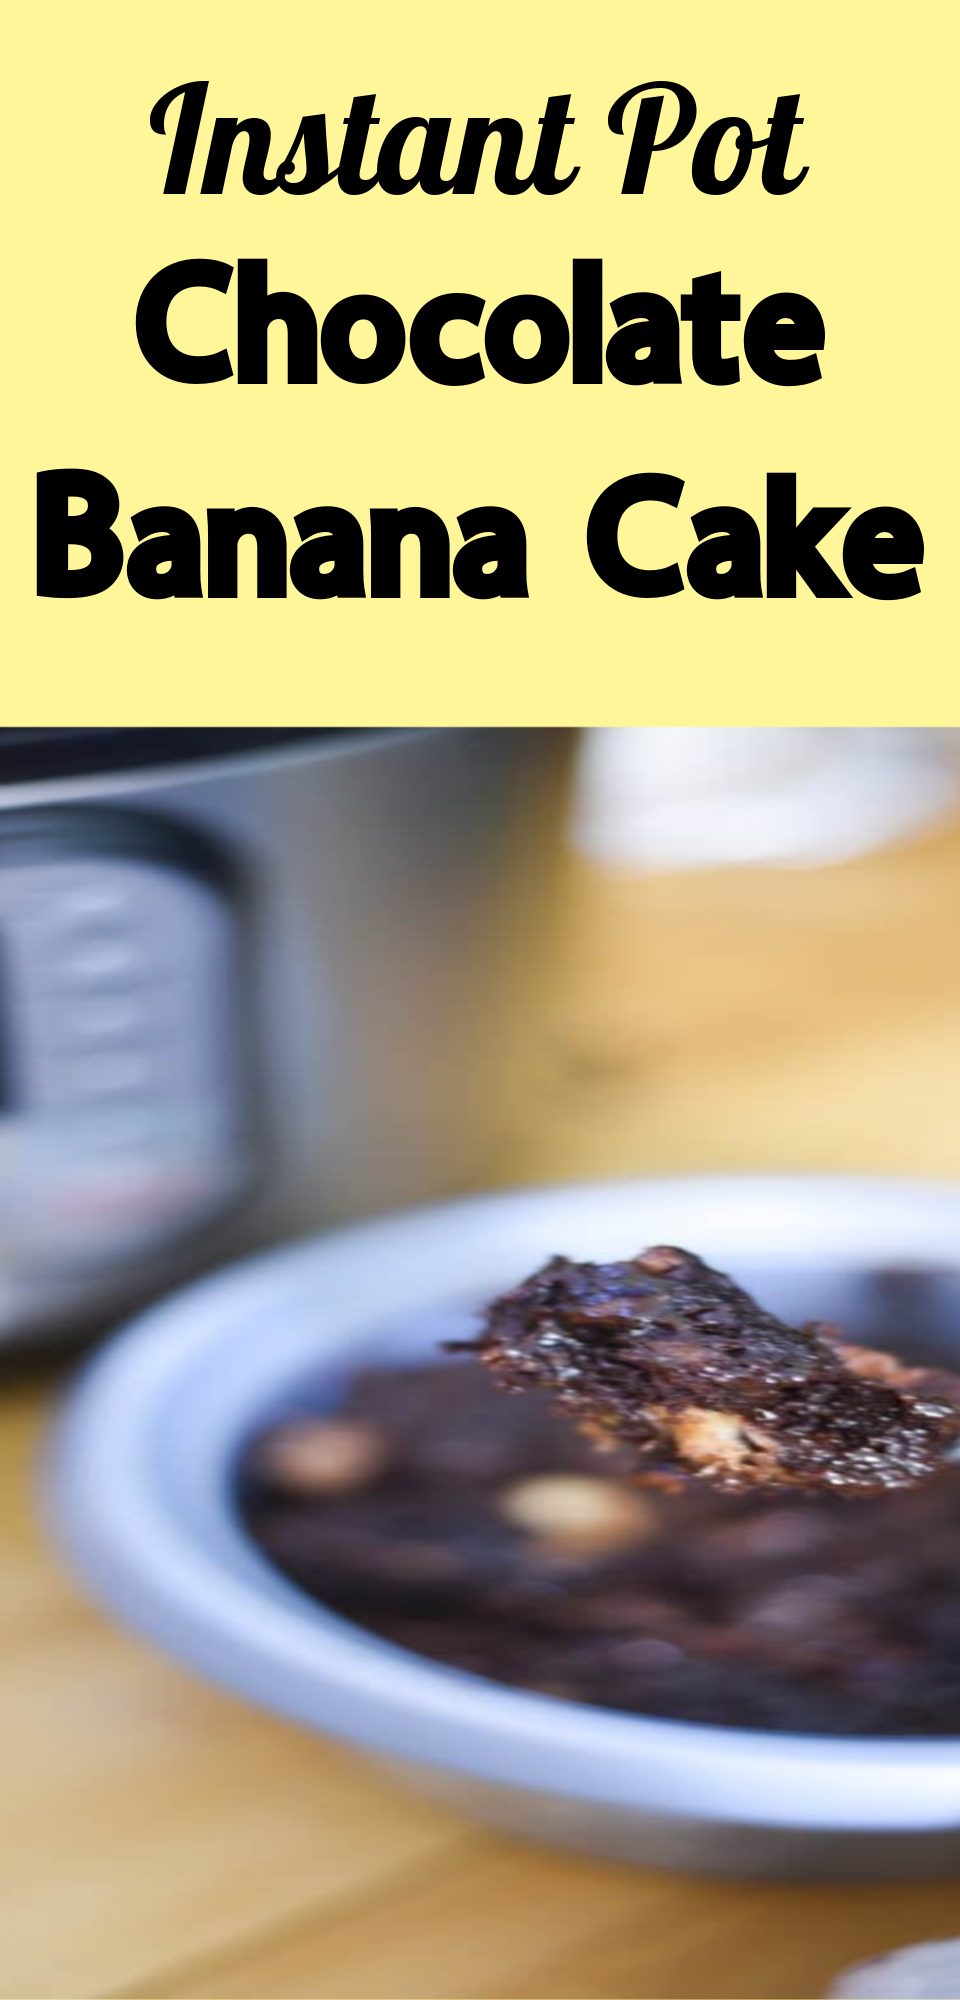 Have you ever wished for an easy and delicious dessert recipe that doesn't require a lot of time or ingredients? If so, this Instant Pot chocolate banana cake is perfect for you! With just a few minutes of prep time and a few simple ingredients, you can have this decadent cake ready to enjoy.